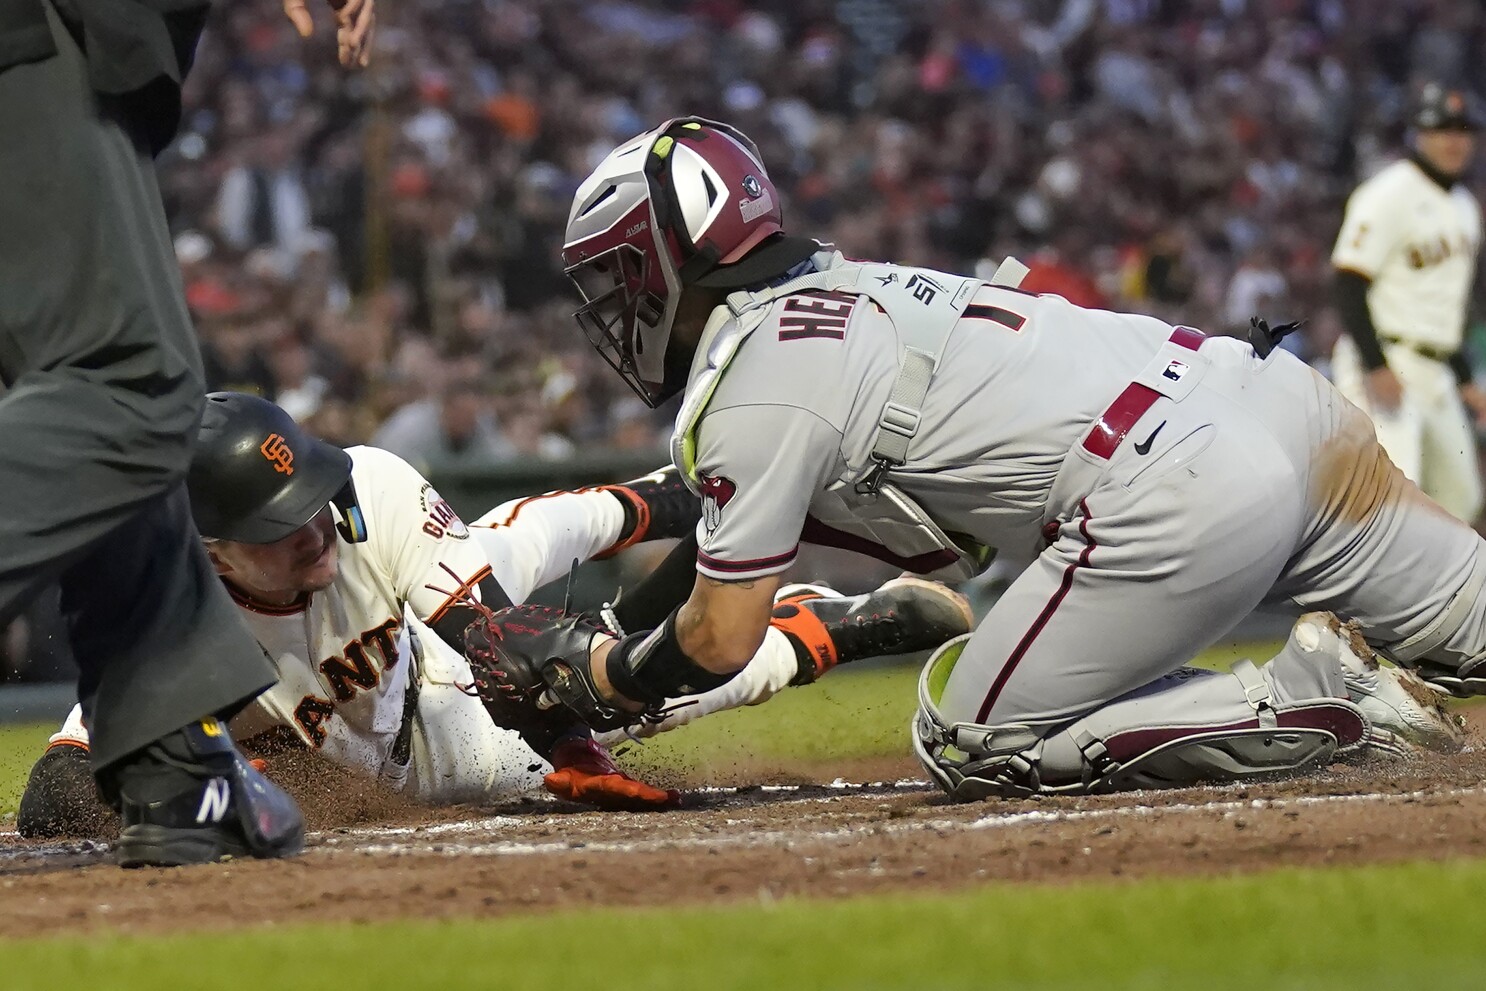 Giants begin series by knocking off West-leading D-backs